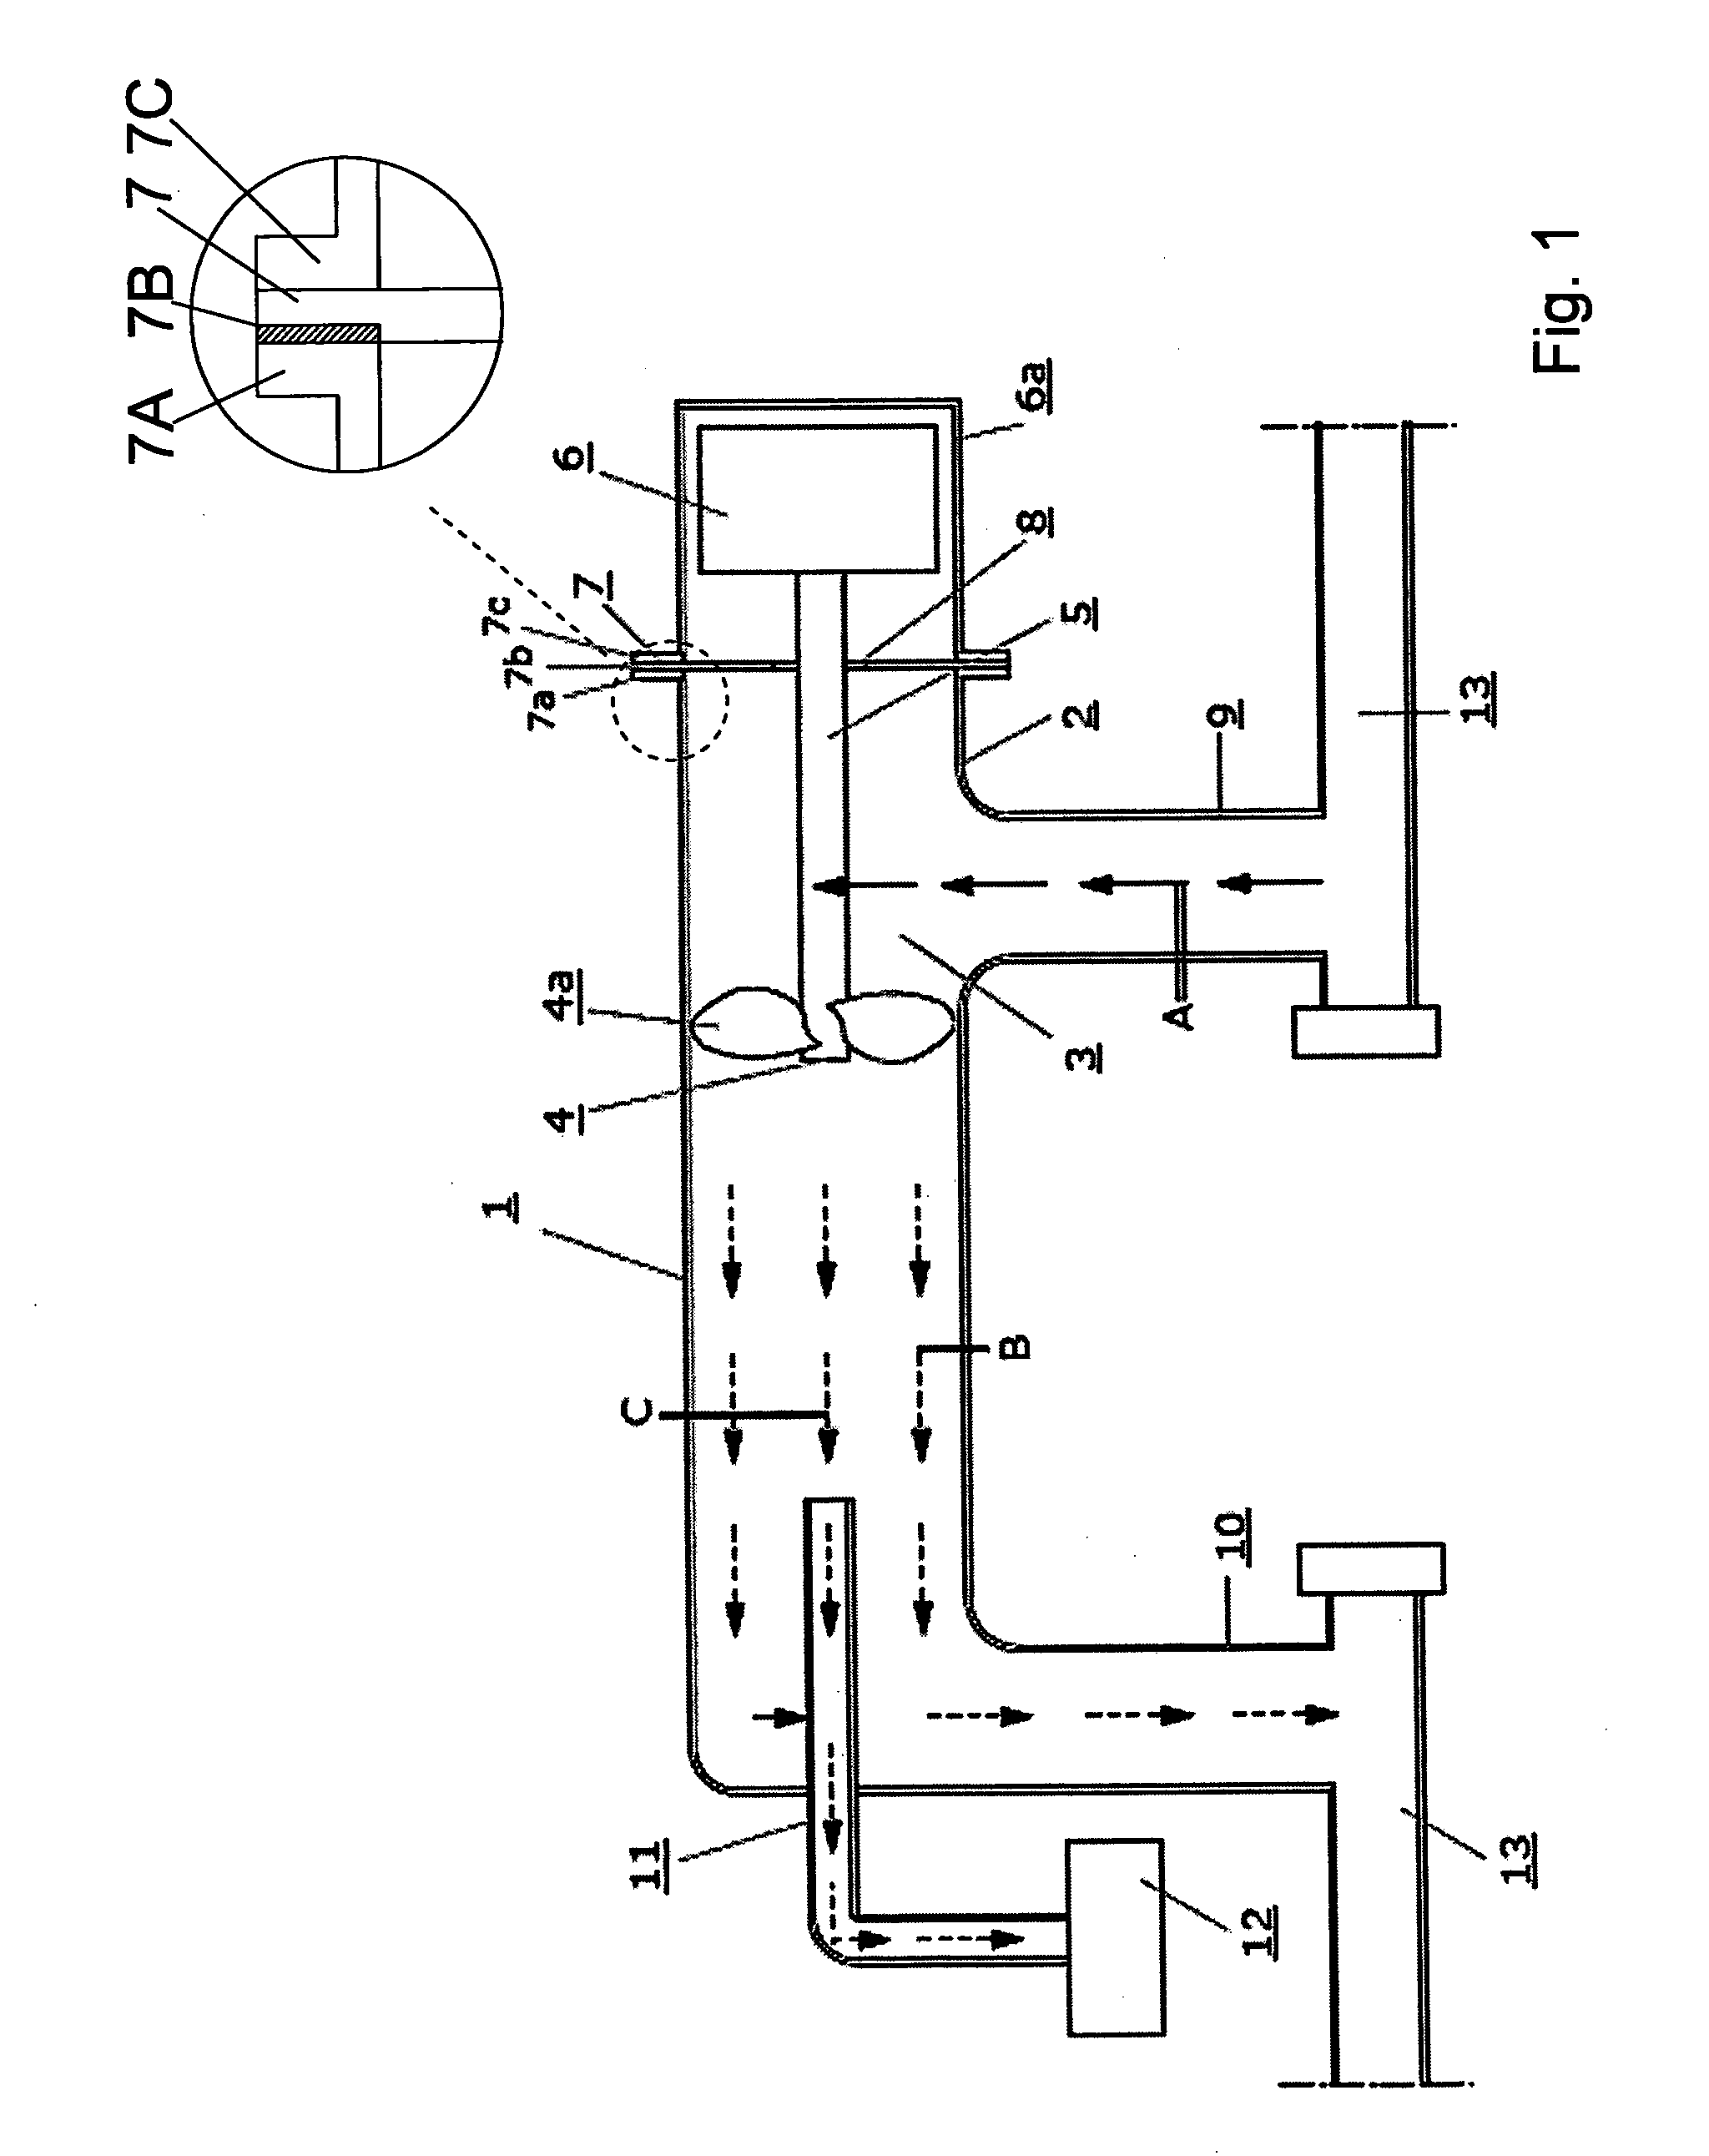 Liquid separating device for the separation of a liquid mixture